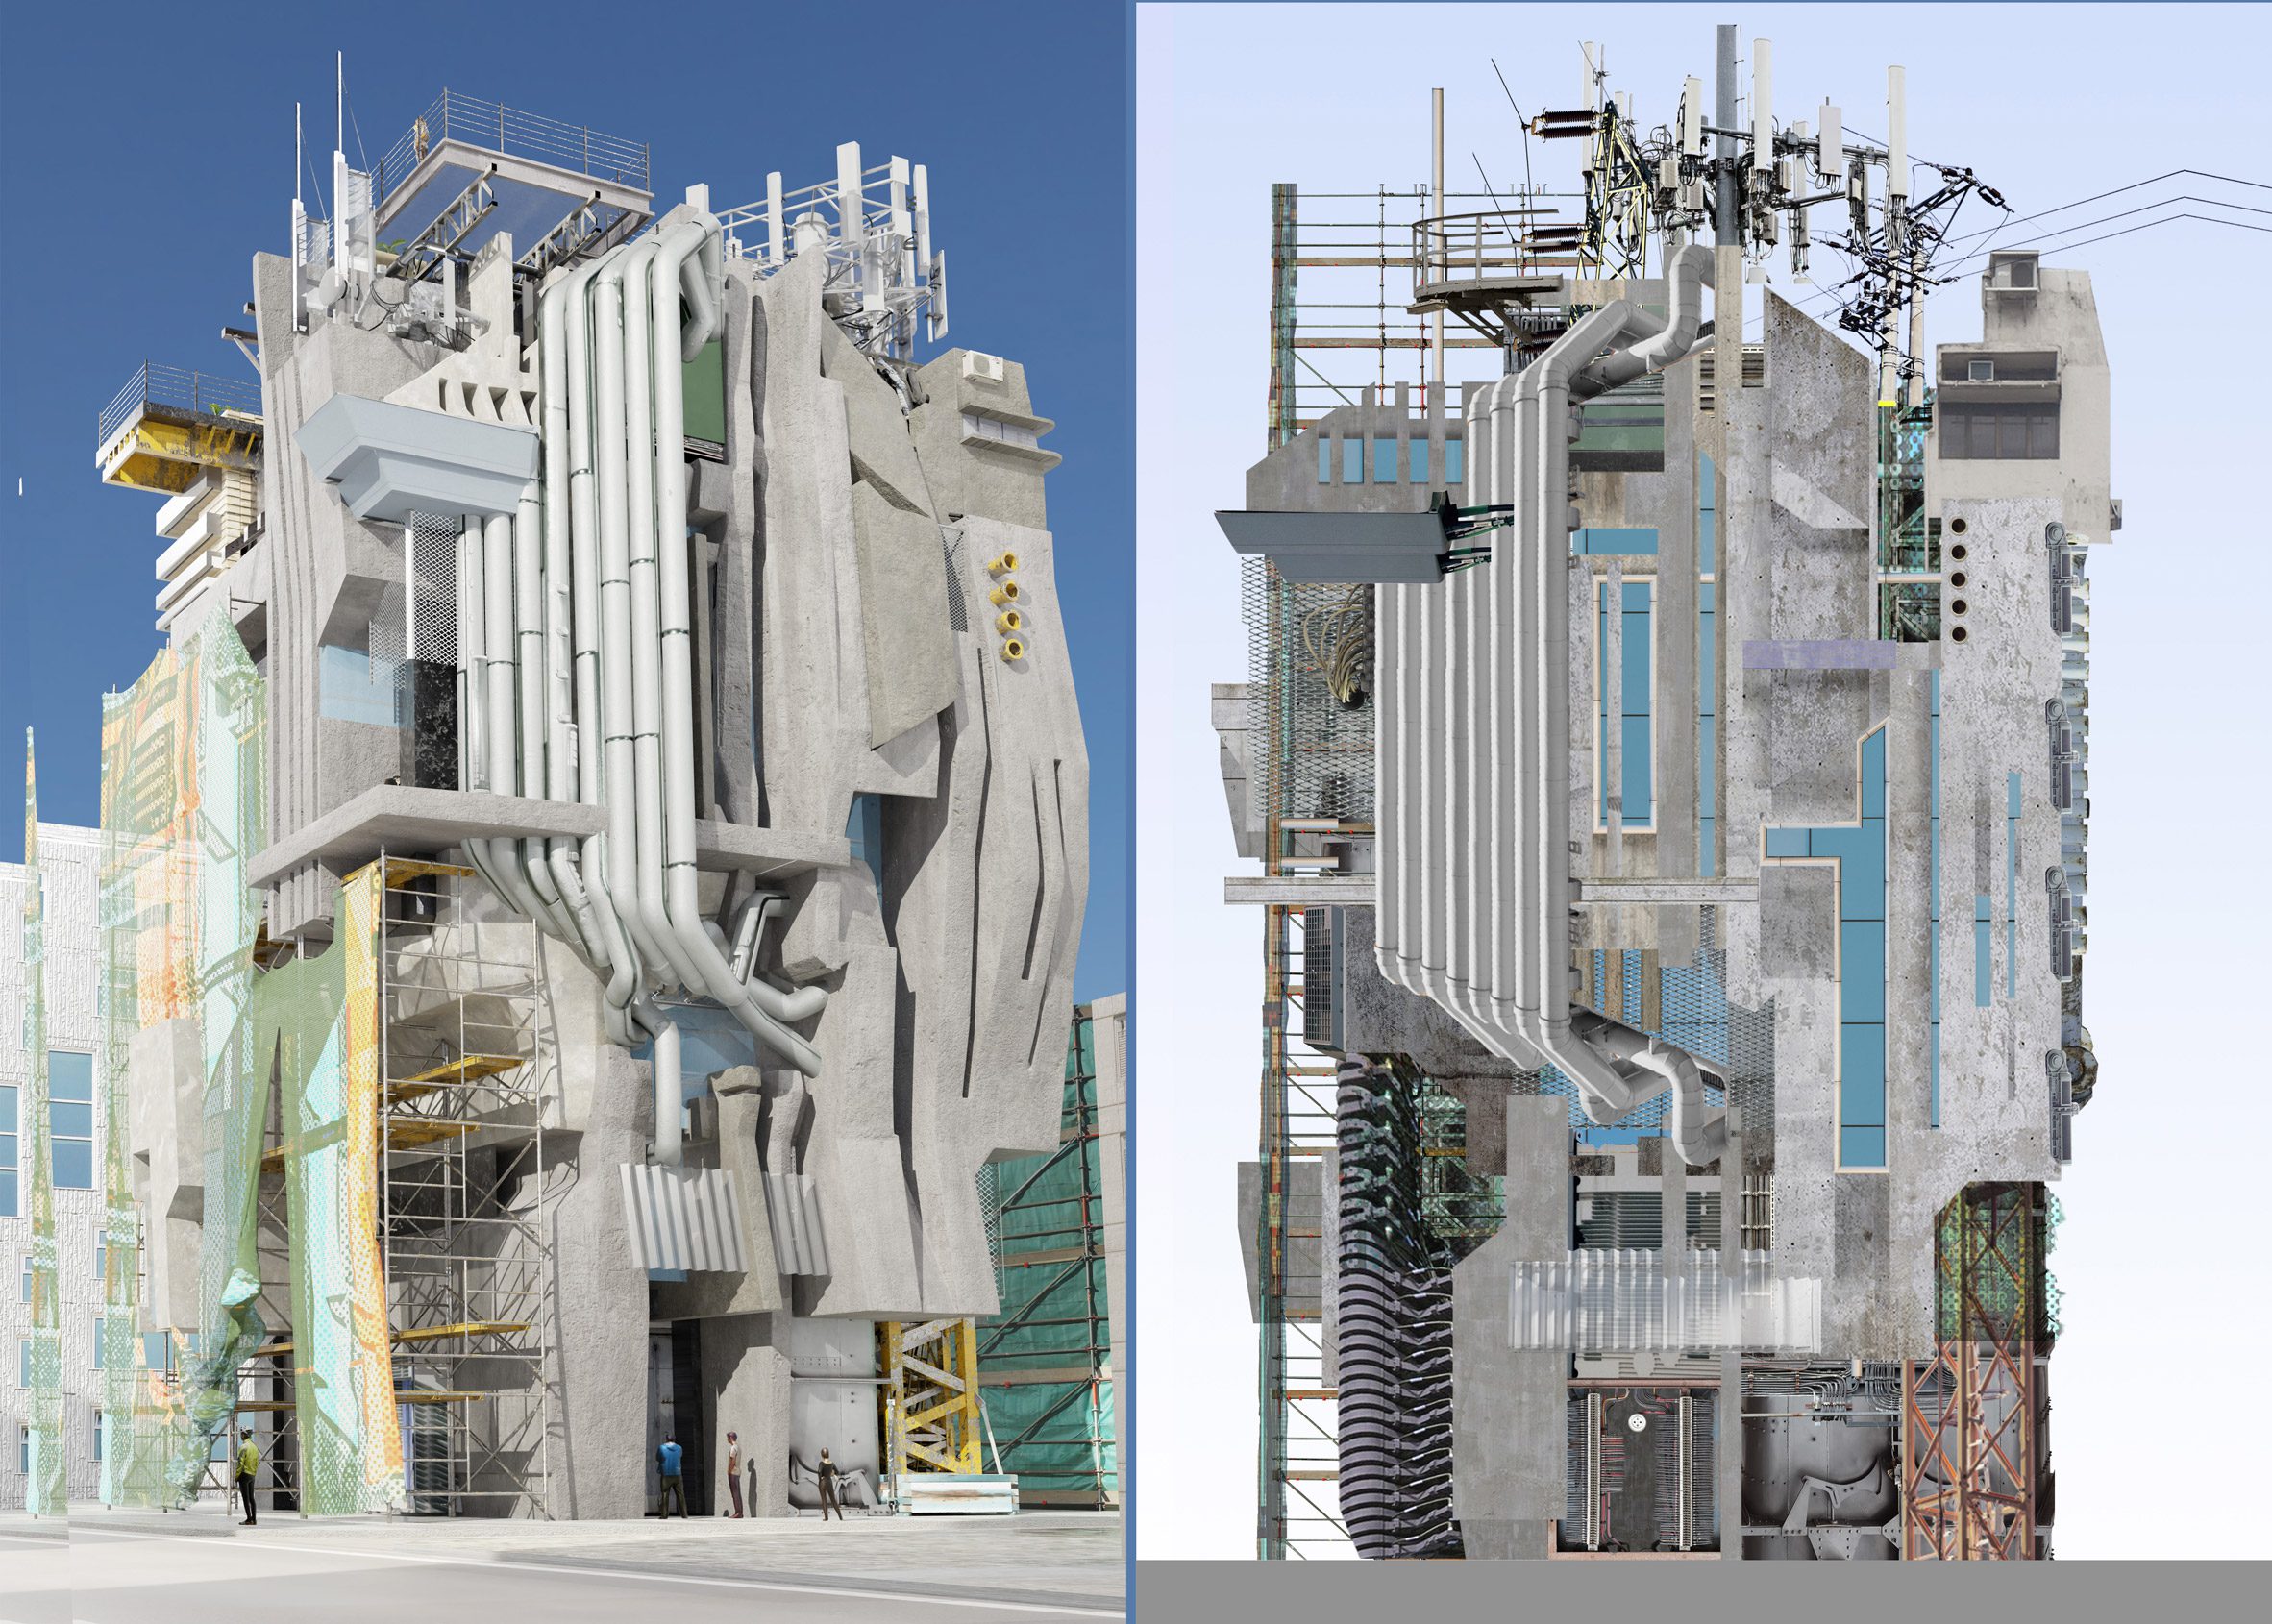 Renderings of a building that explores the relationship between tectonics and textile production